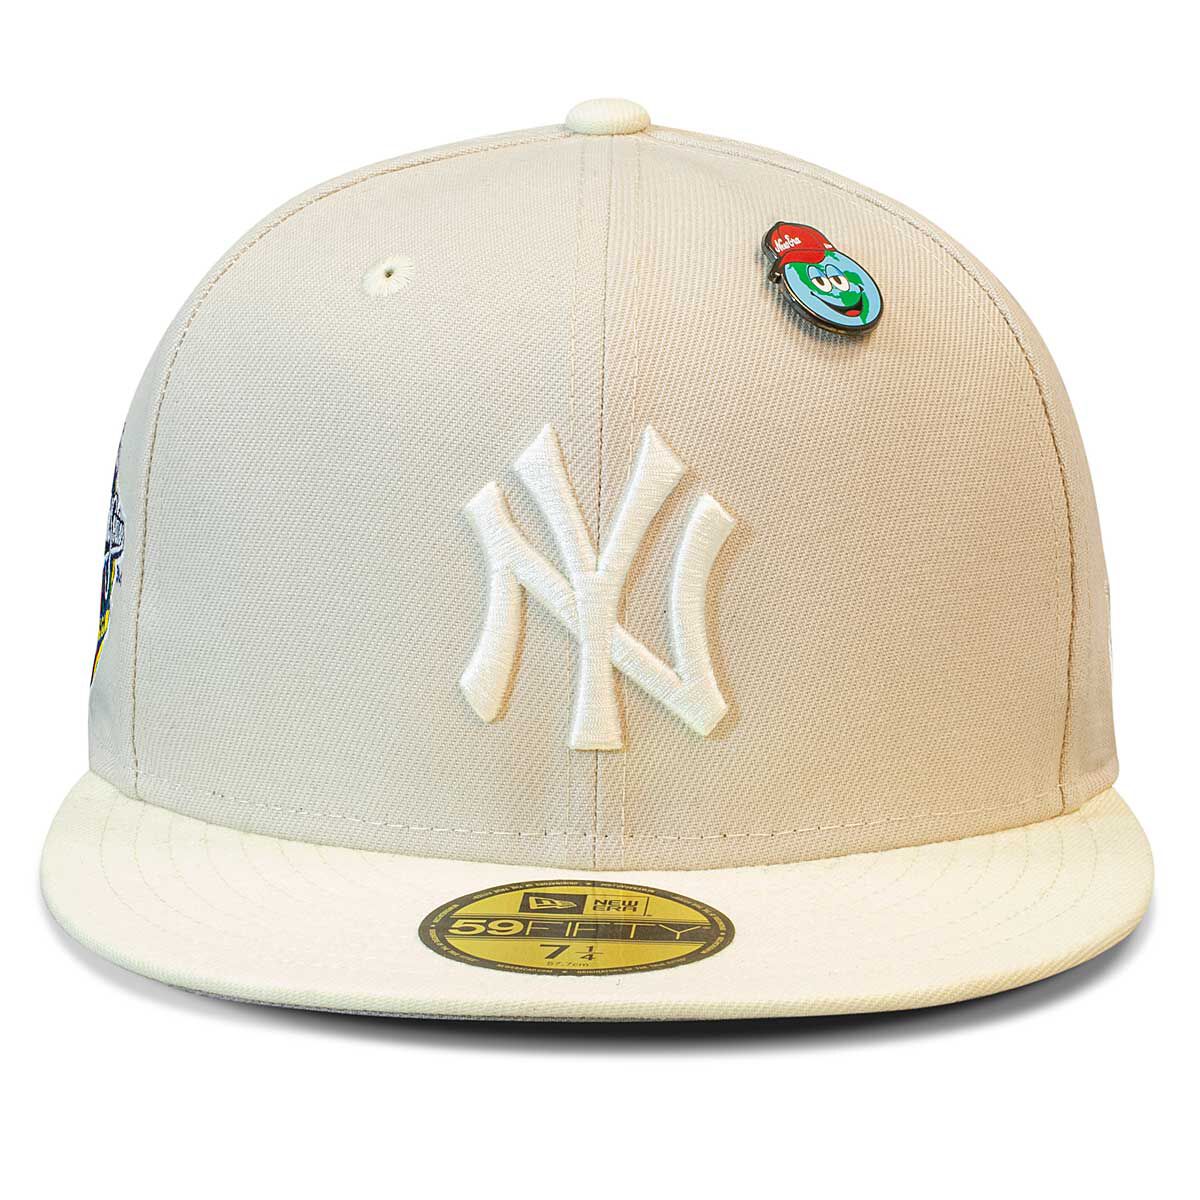 NEW ERA 59FIFTY MLB NEW YORK YANKEES WS PIN BEIGE FITTED CAP